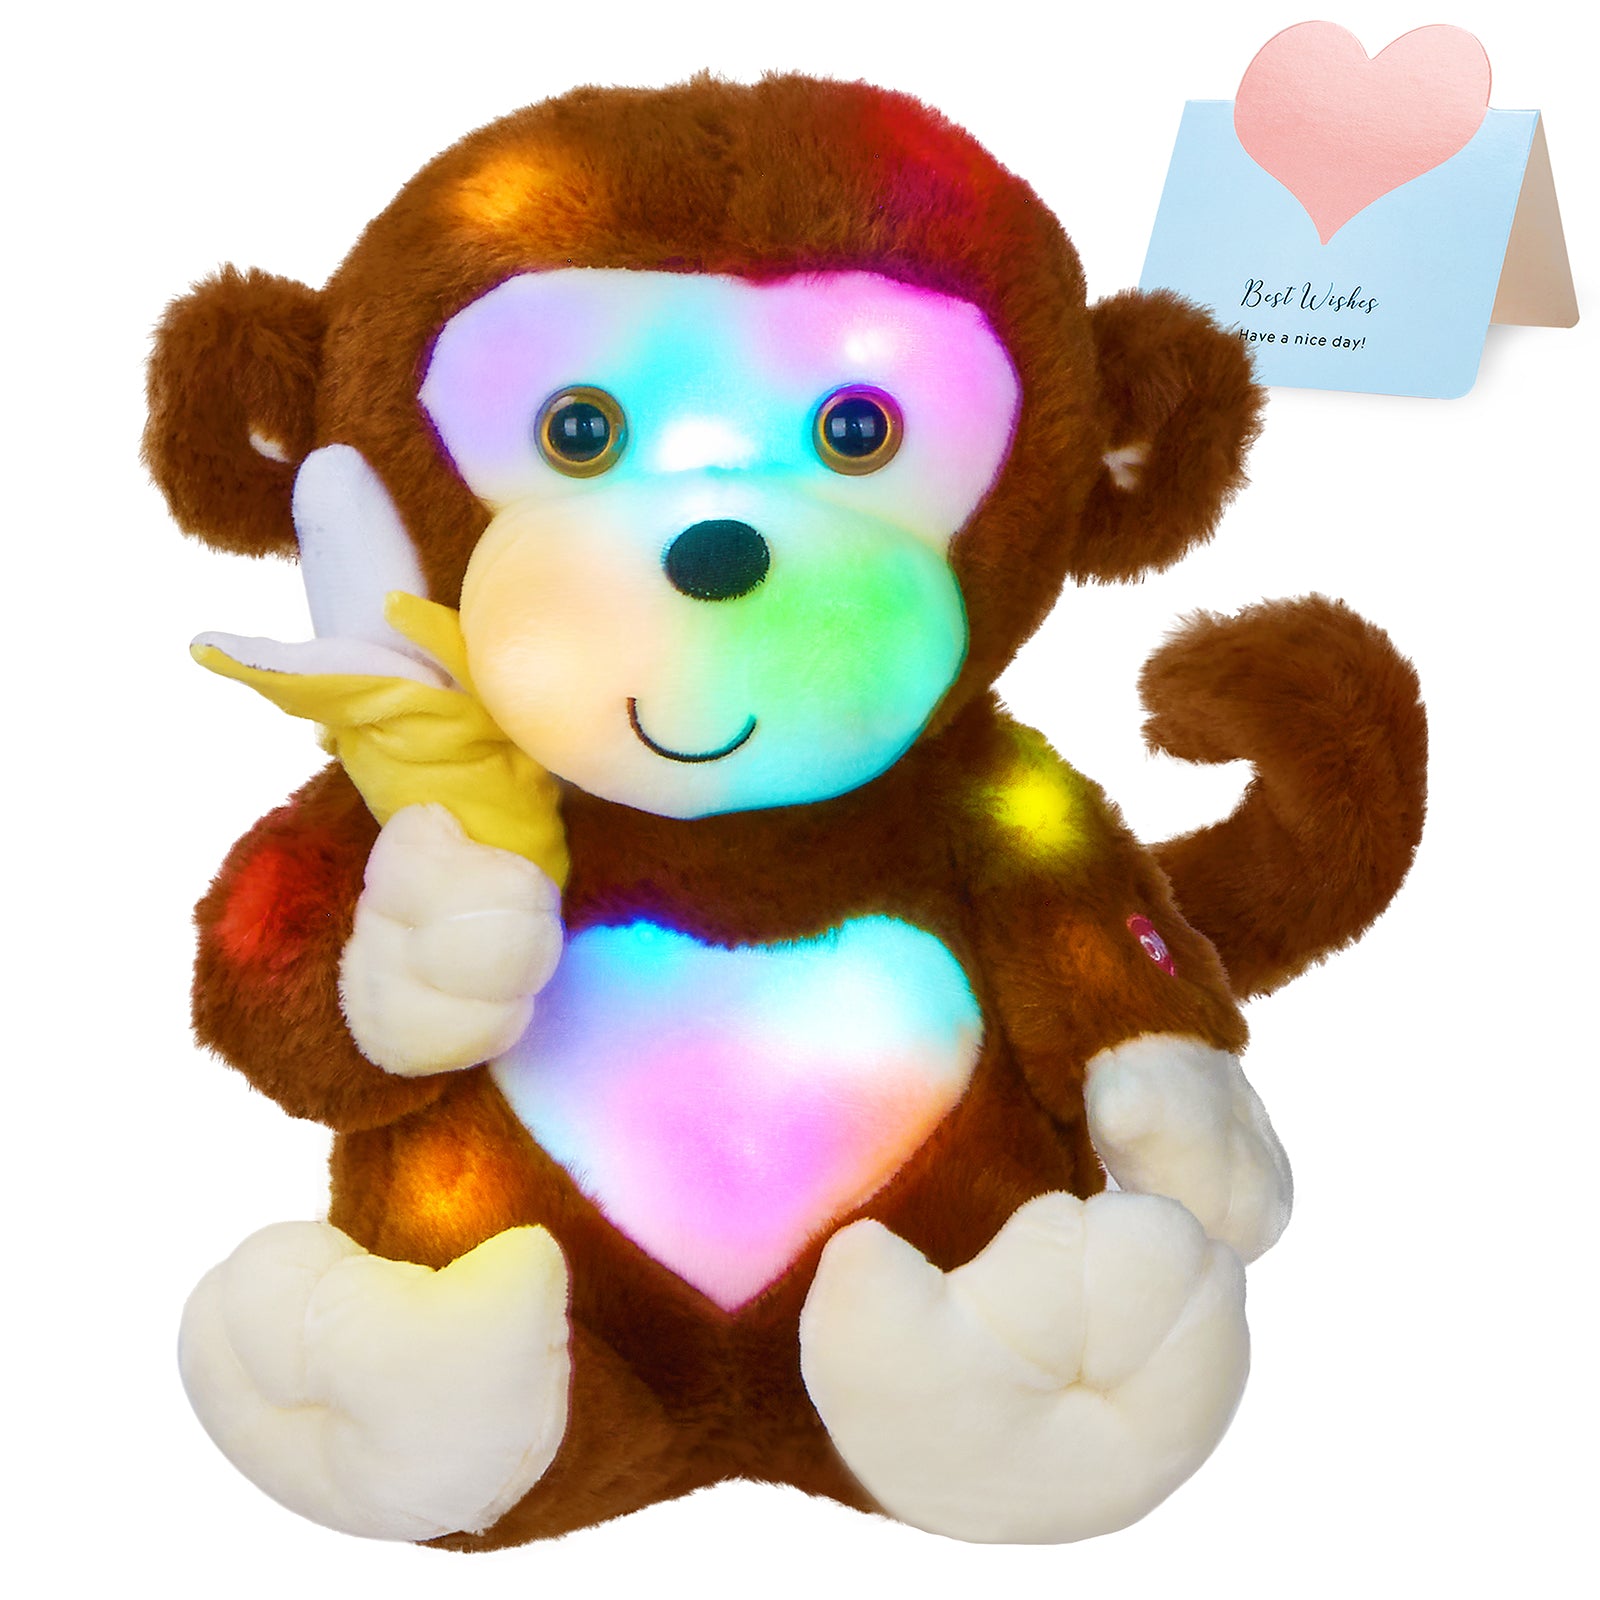 WEWILL Light up Monkey Plush Toys with Banana in Hand , Brown, 12.5 inch - Glow Guards